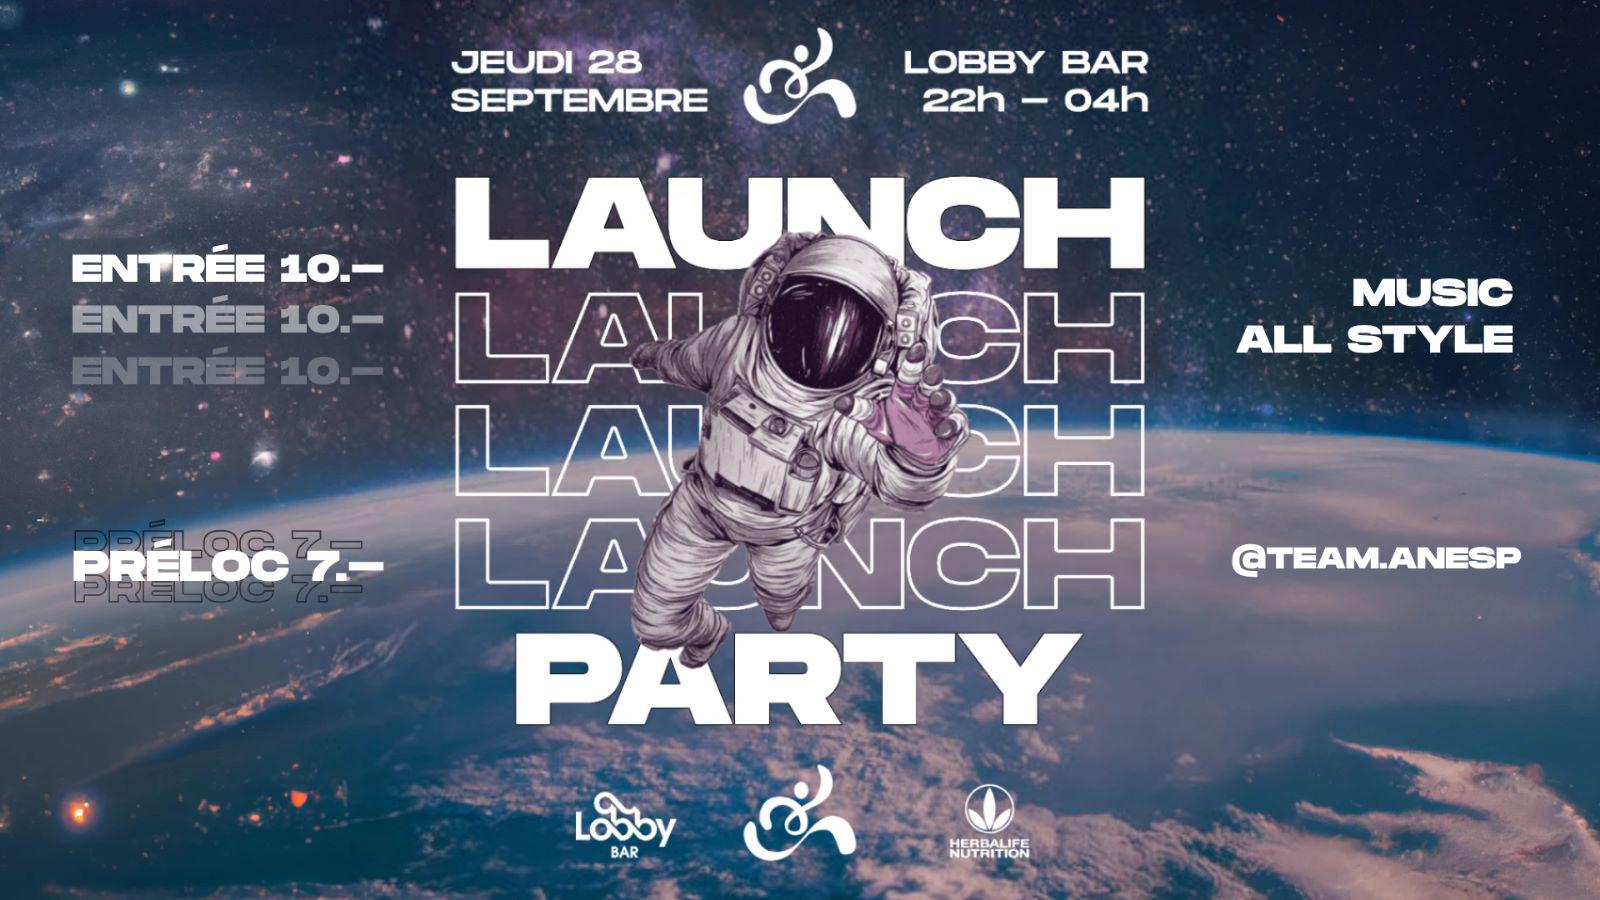 AFFICHE_LAUNCHPARTY2809_ANESP.JPG